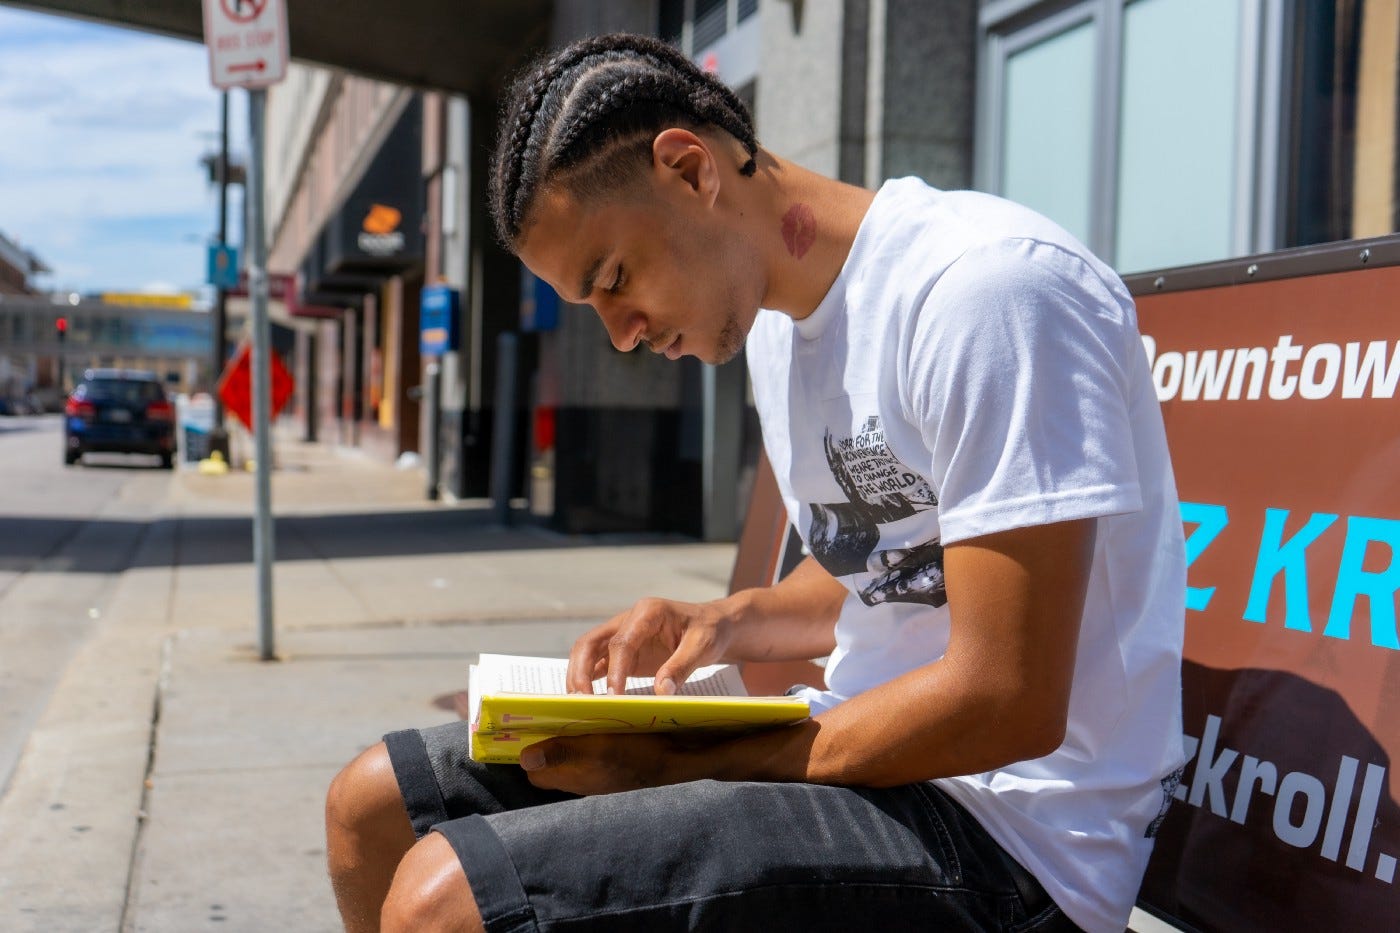 A casually dressed young man reads a book on a city bench. He is engrossed in the reading. Urban landscape of signs, buildings, and cars are in the background.